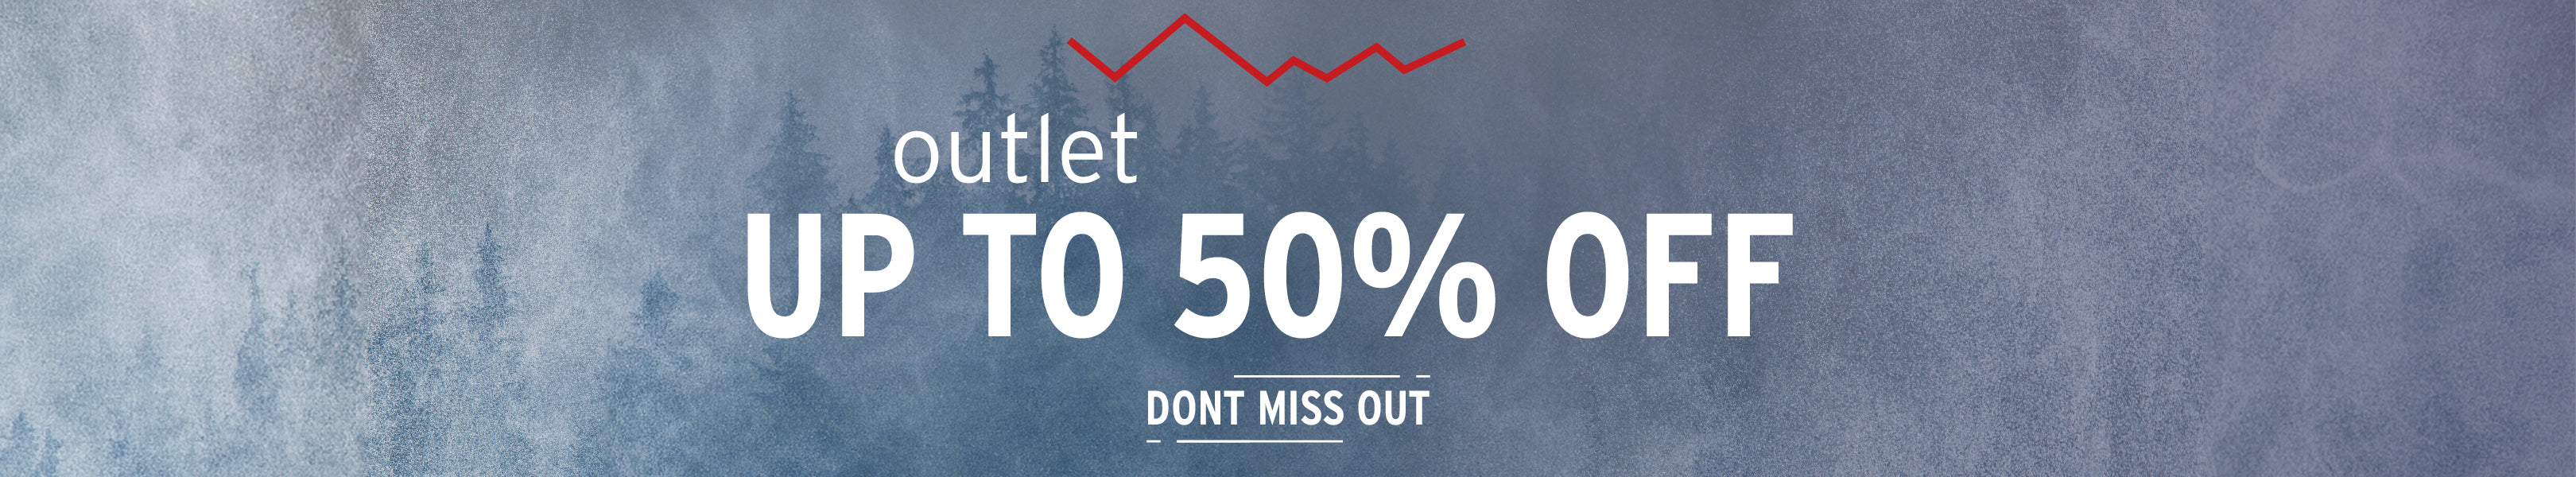 Penfield Outlet Save Up To 50% Off